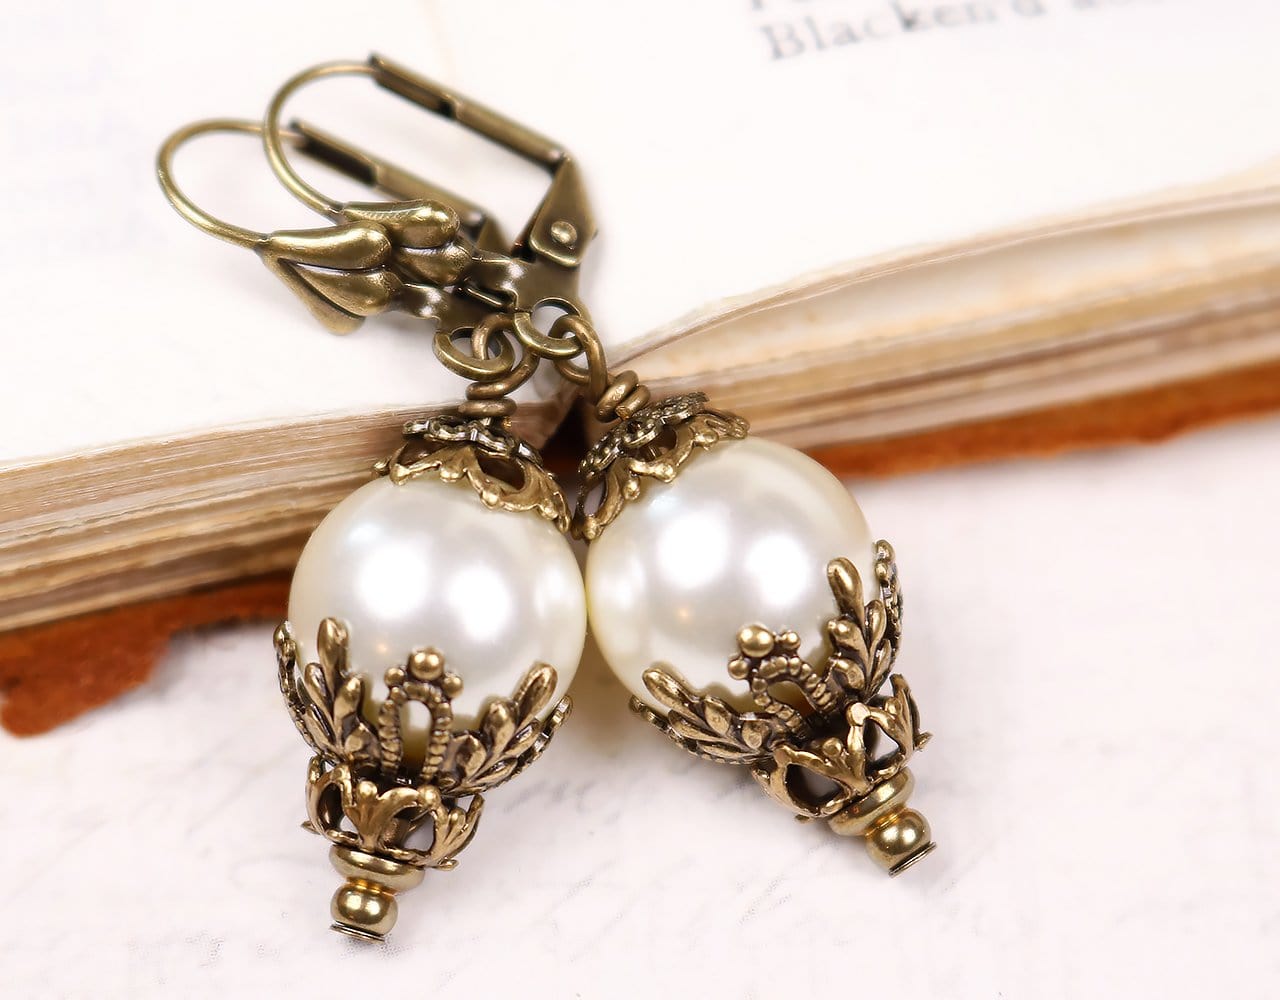 Borgia Earrings in Cream Pearl and Antiqued Brass by Rabbitwood and Reason